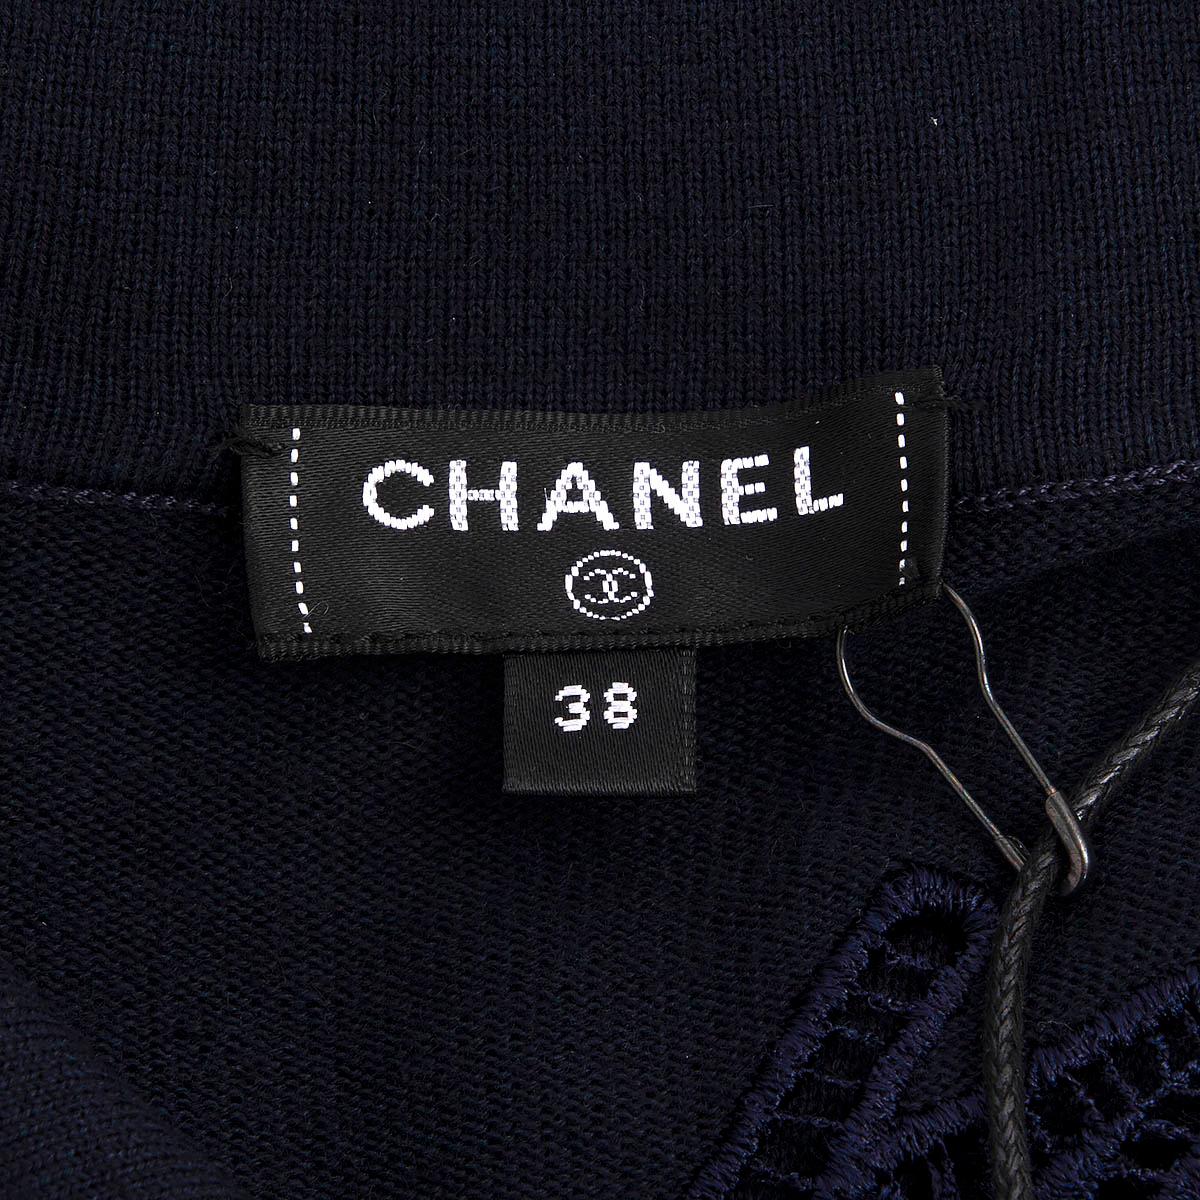 CHANEL navy blue cotton 2020 20C LOGO EMBROIDERED Cardigan Sweater 38 S 3